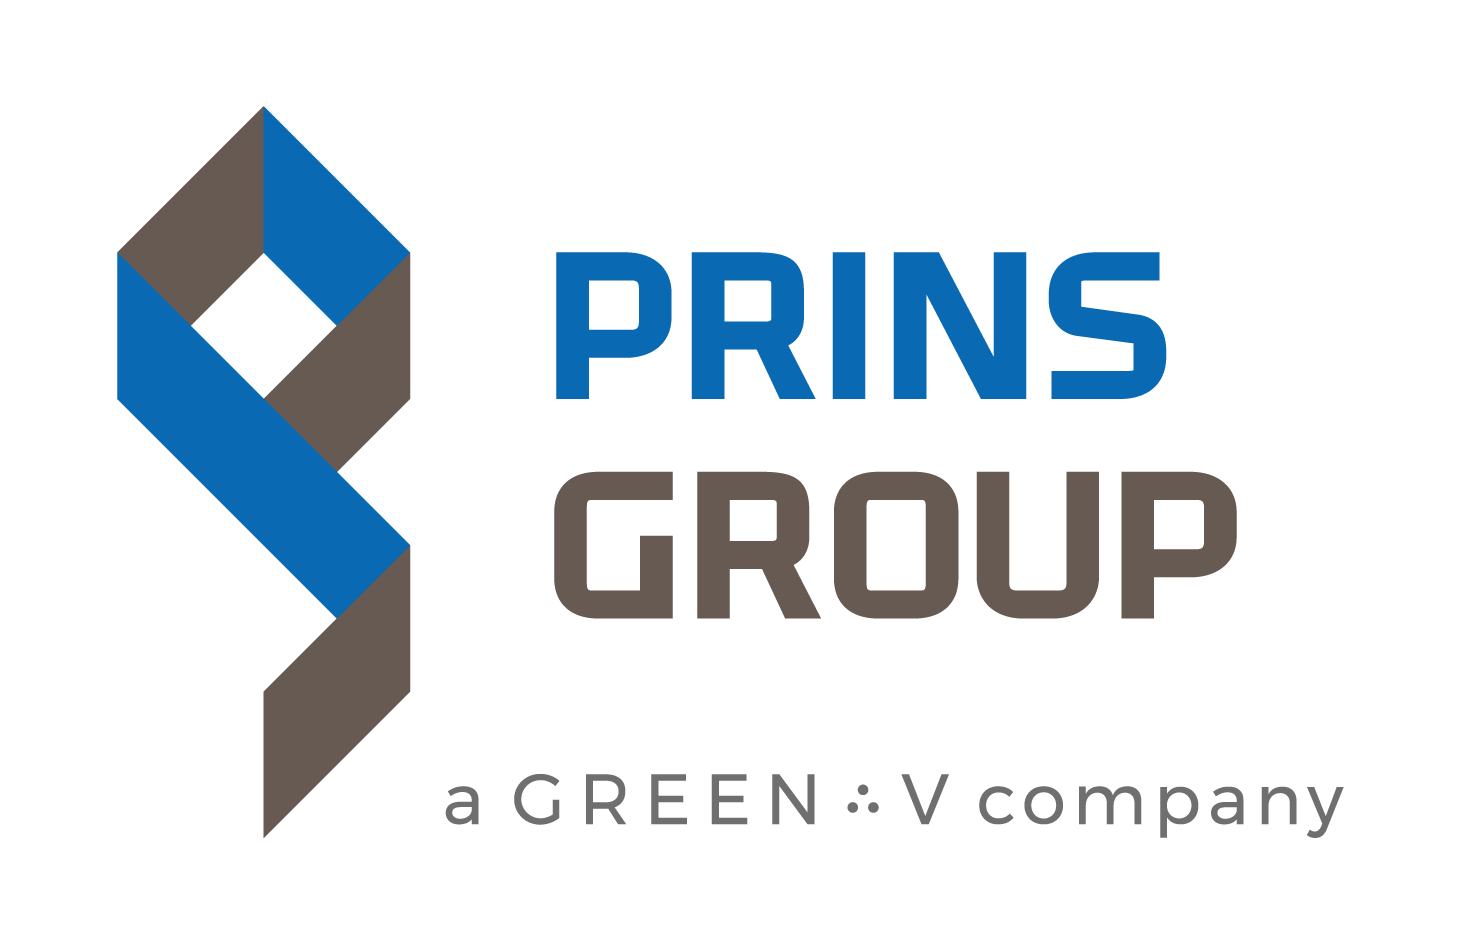 Prins-Group Horticultural Projects-Logo_CMYK.jpg